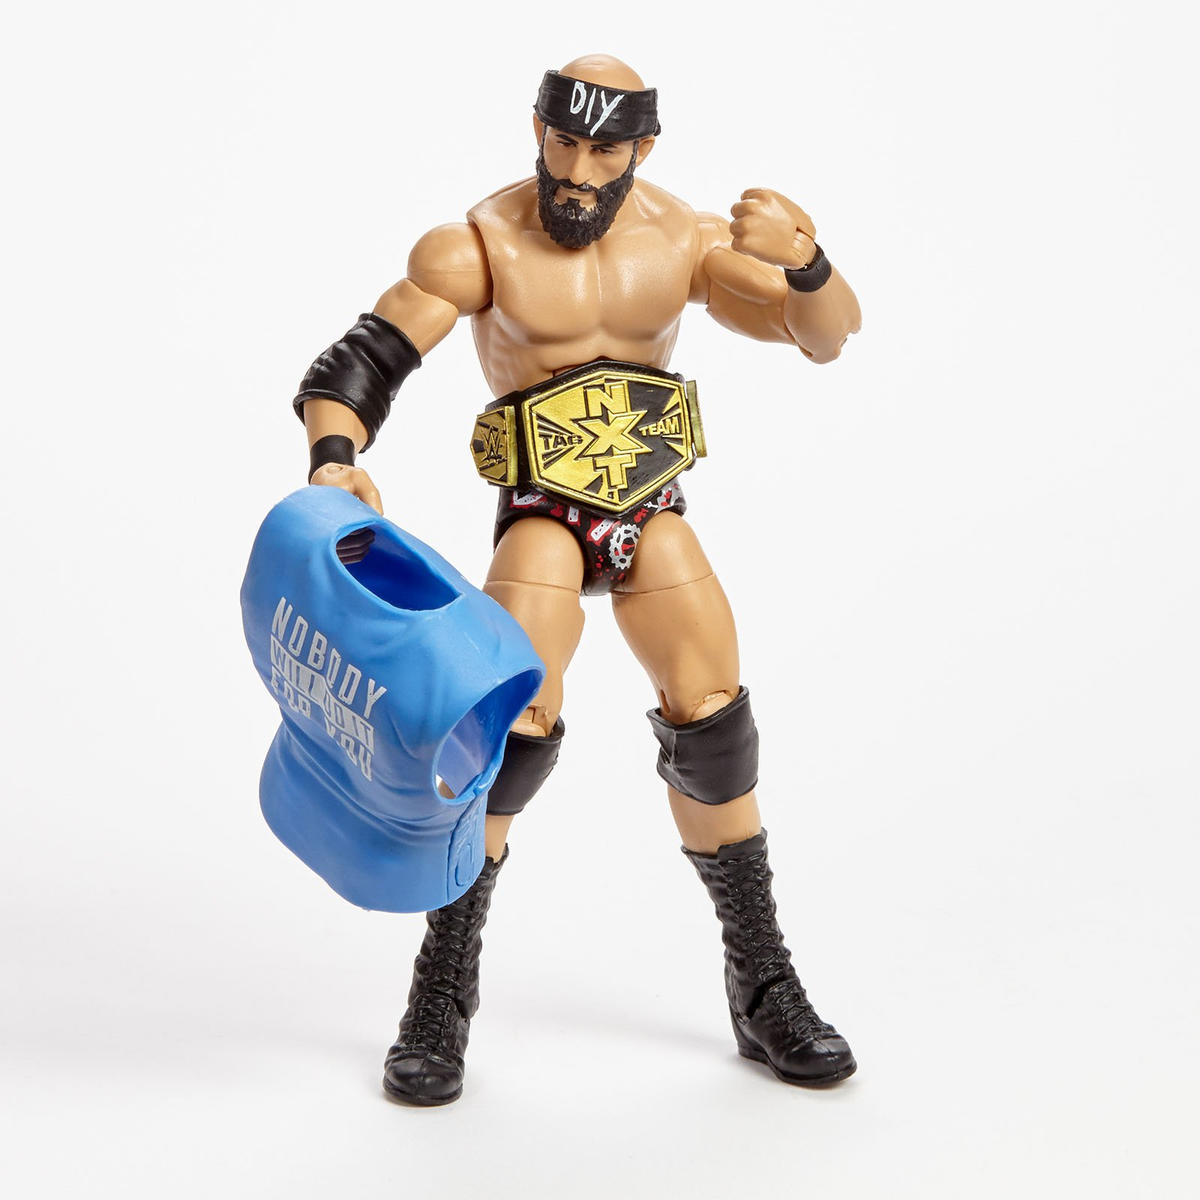 2018 WWE Mattel Elite Collection Hall of Champions Series 2 Tommaso Ciampa [Exclusive]